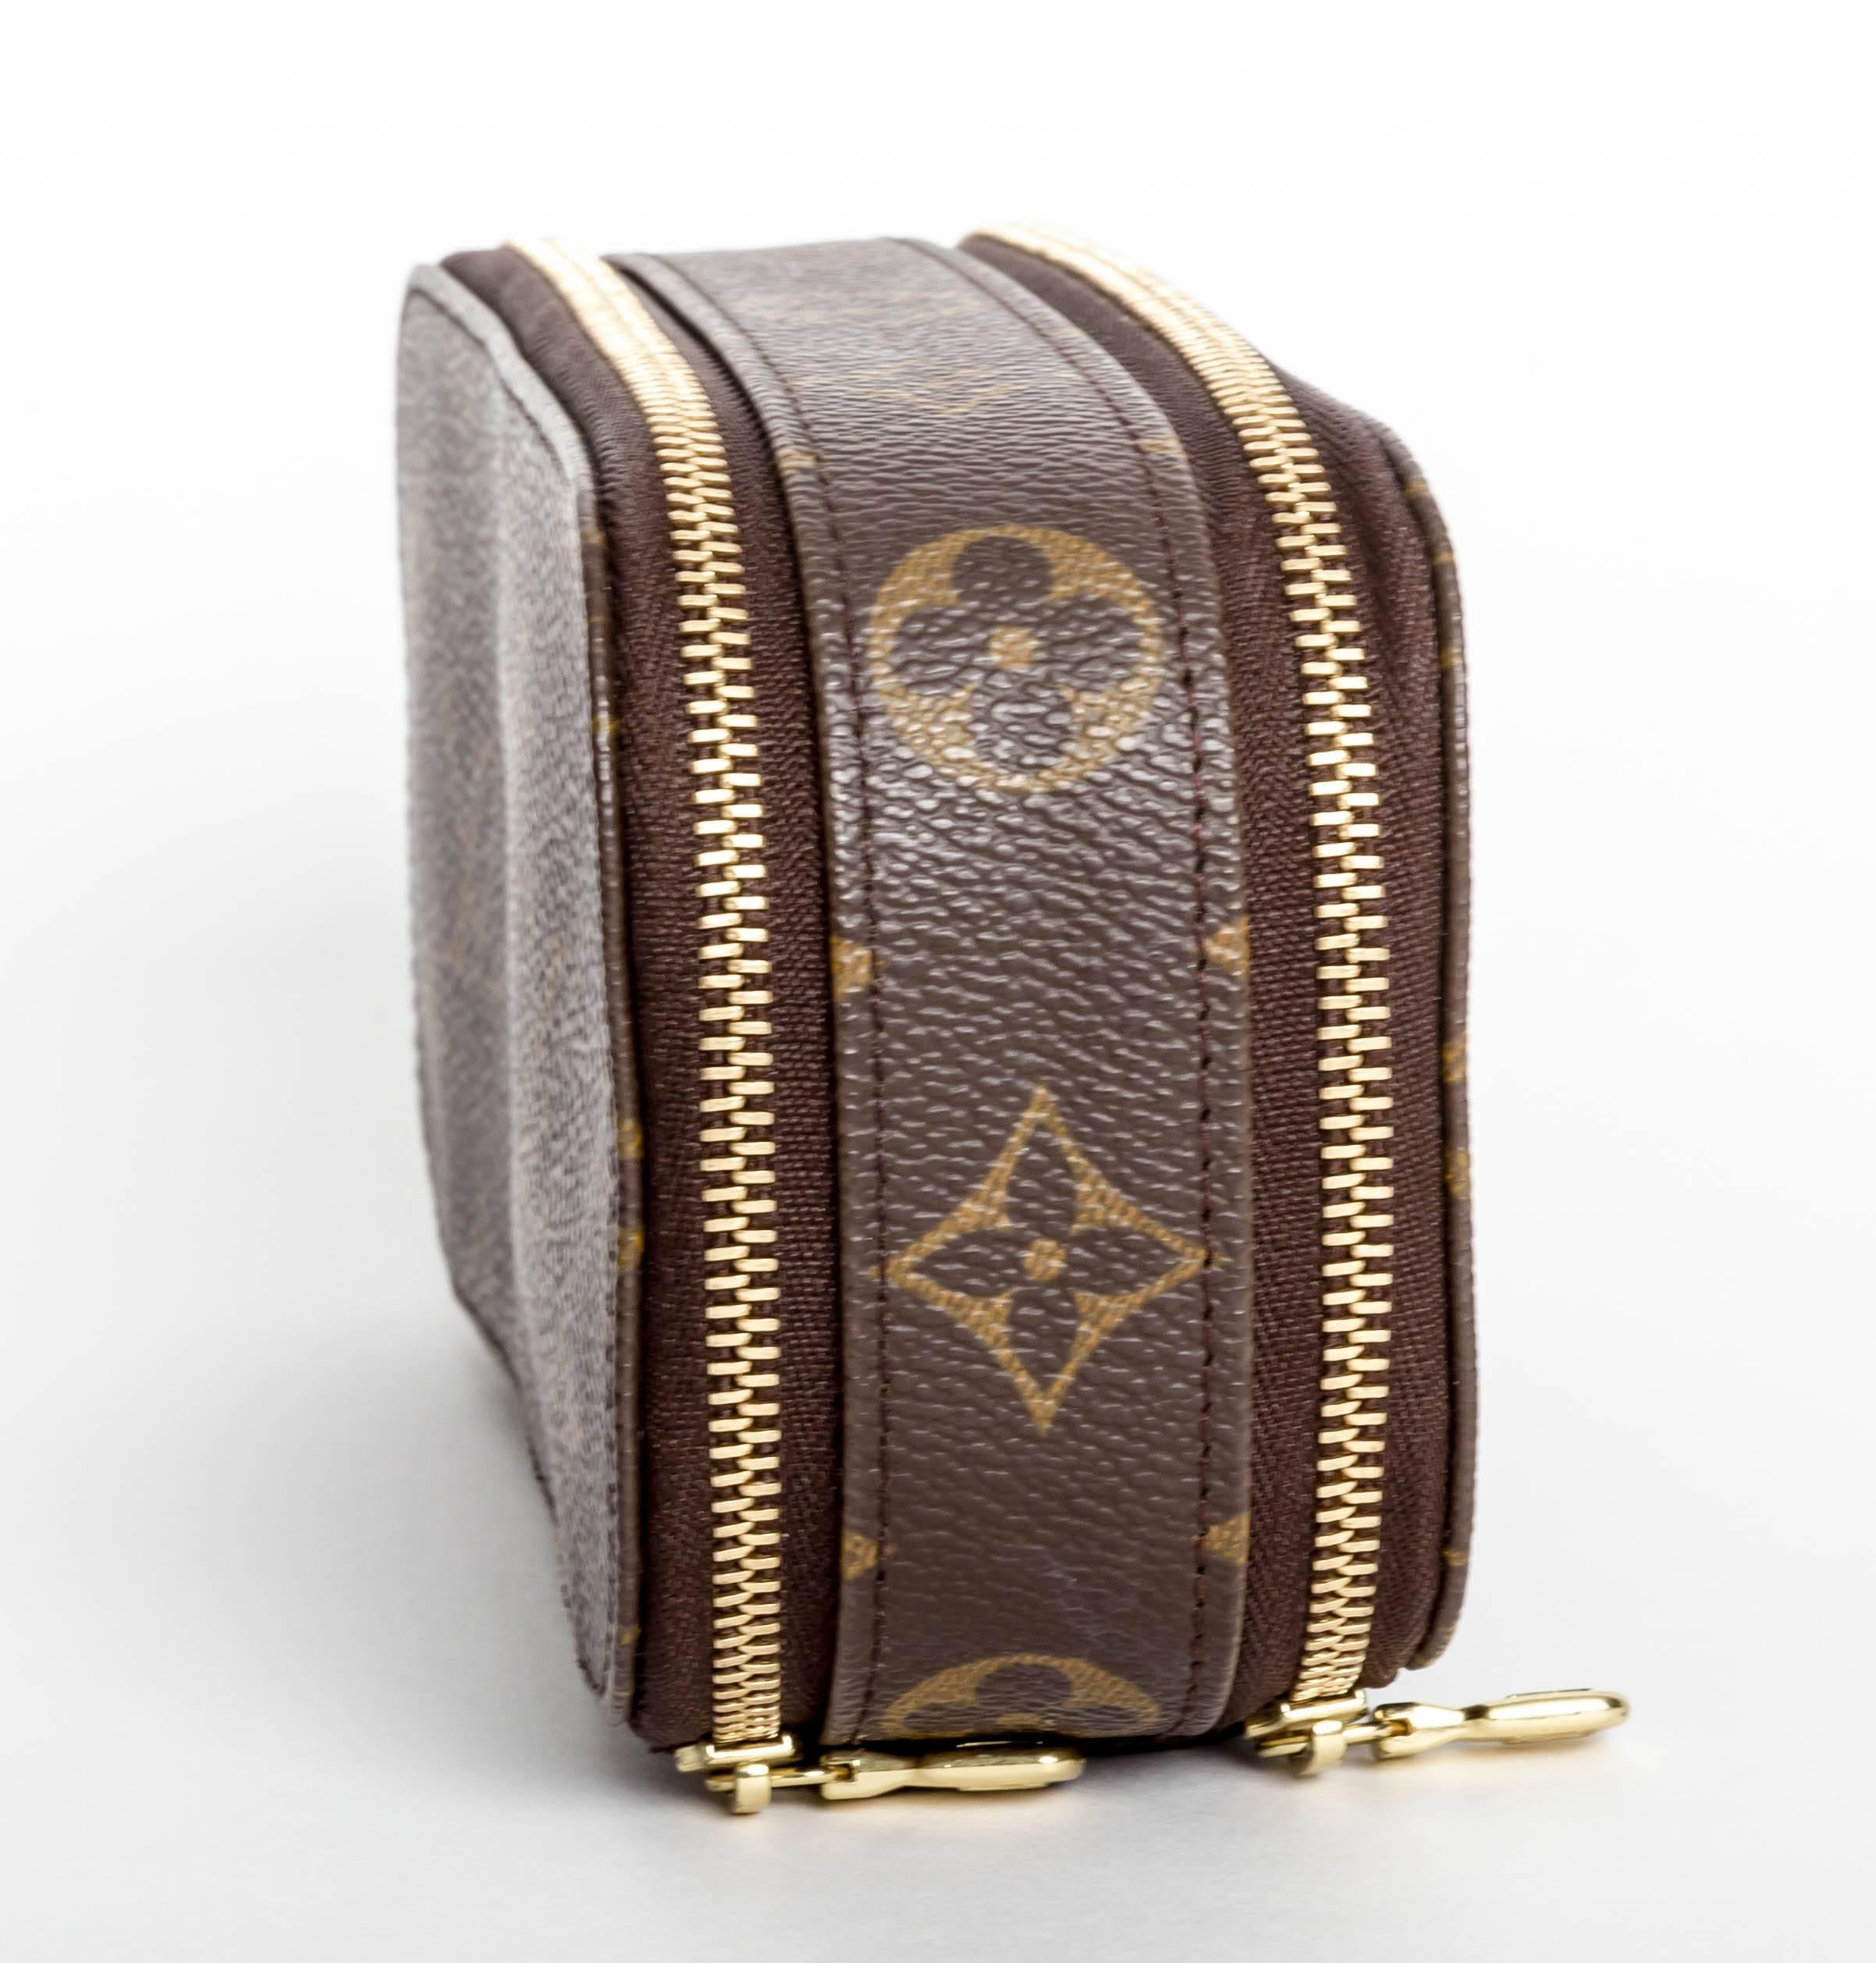 Incredibly Chic Louis Vuitton Double Zip Jewelry Case
Immaculate Exterior Condition
Some marks to interior
